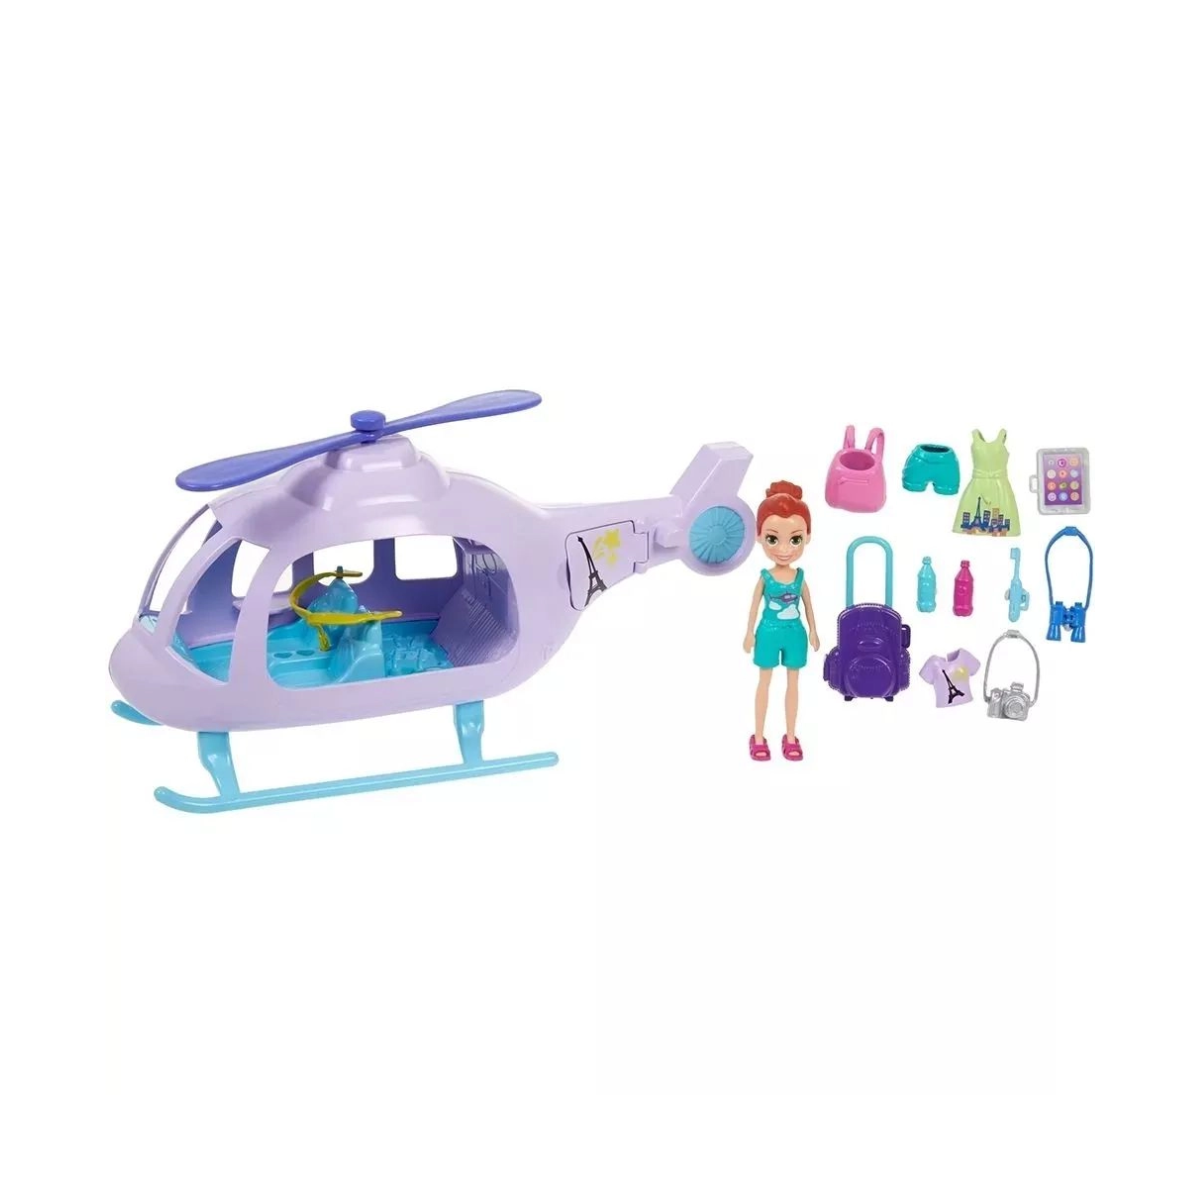 Lat Helicopter Playset